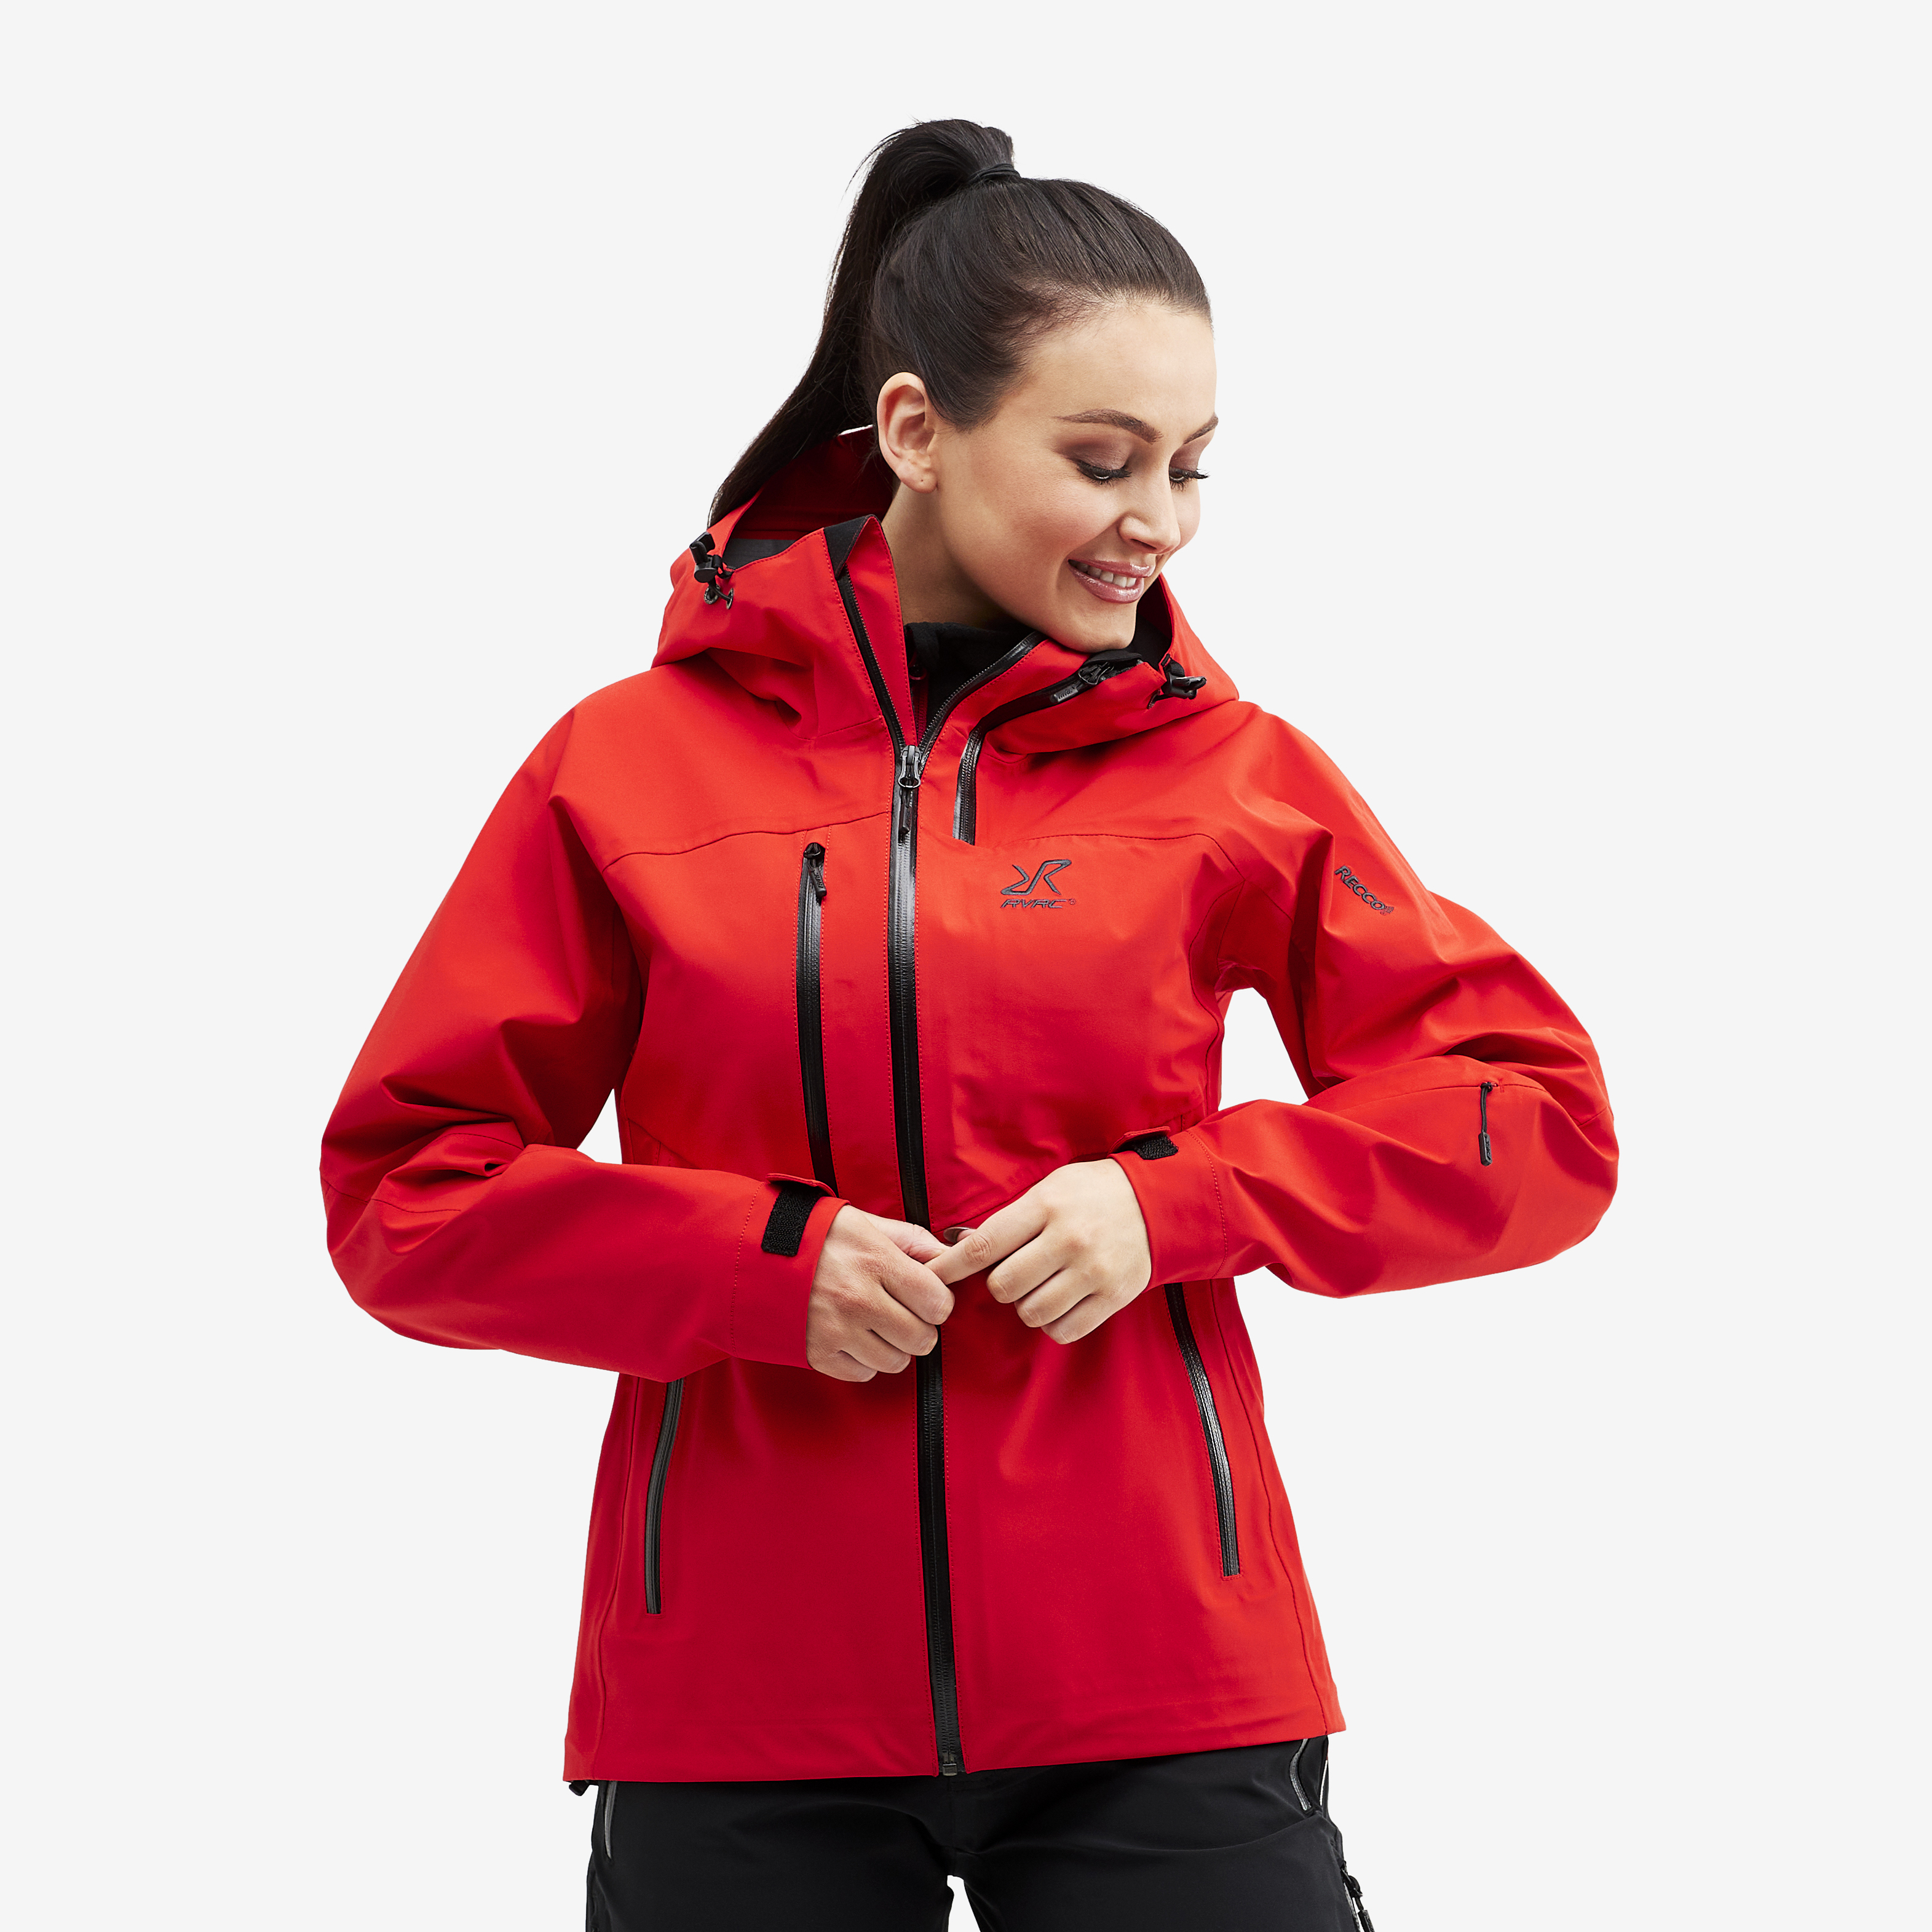 Cyclone Rescue Jacket 2.0 Flame Scarlet